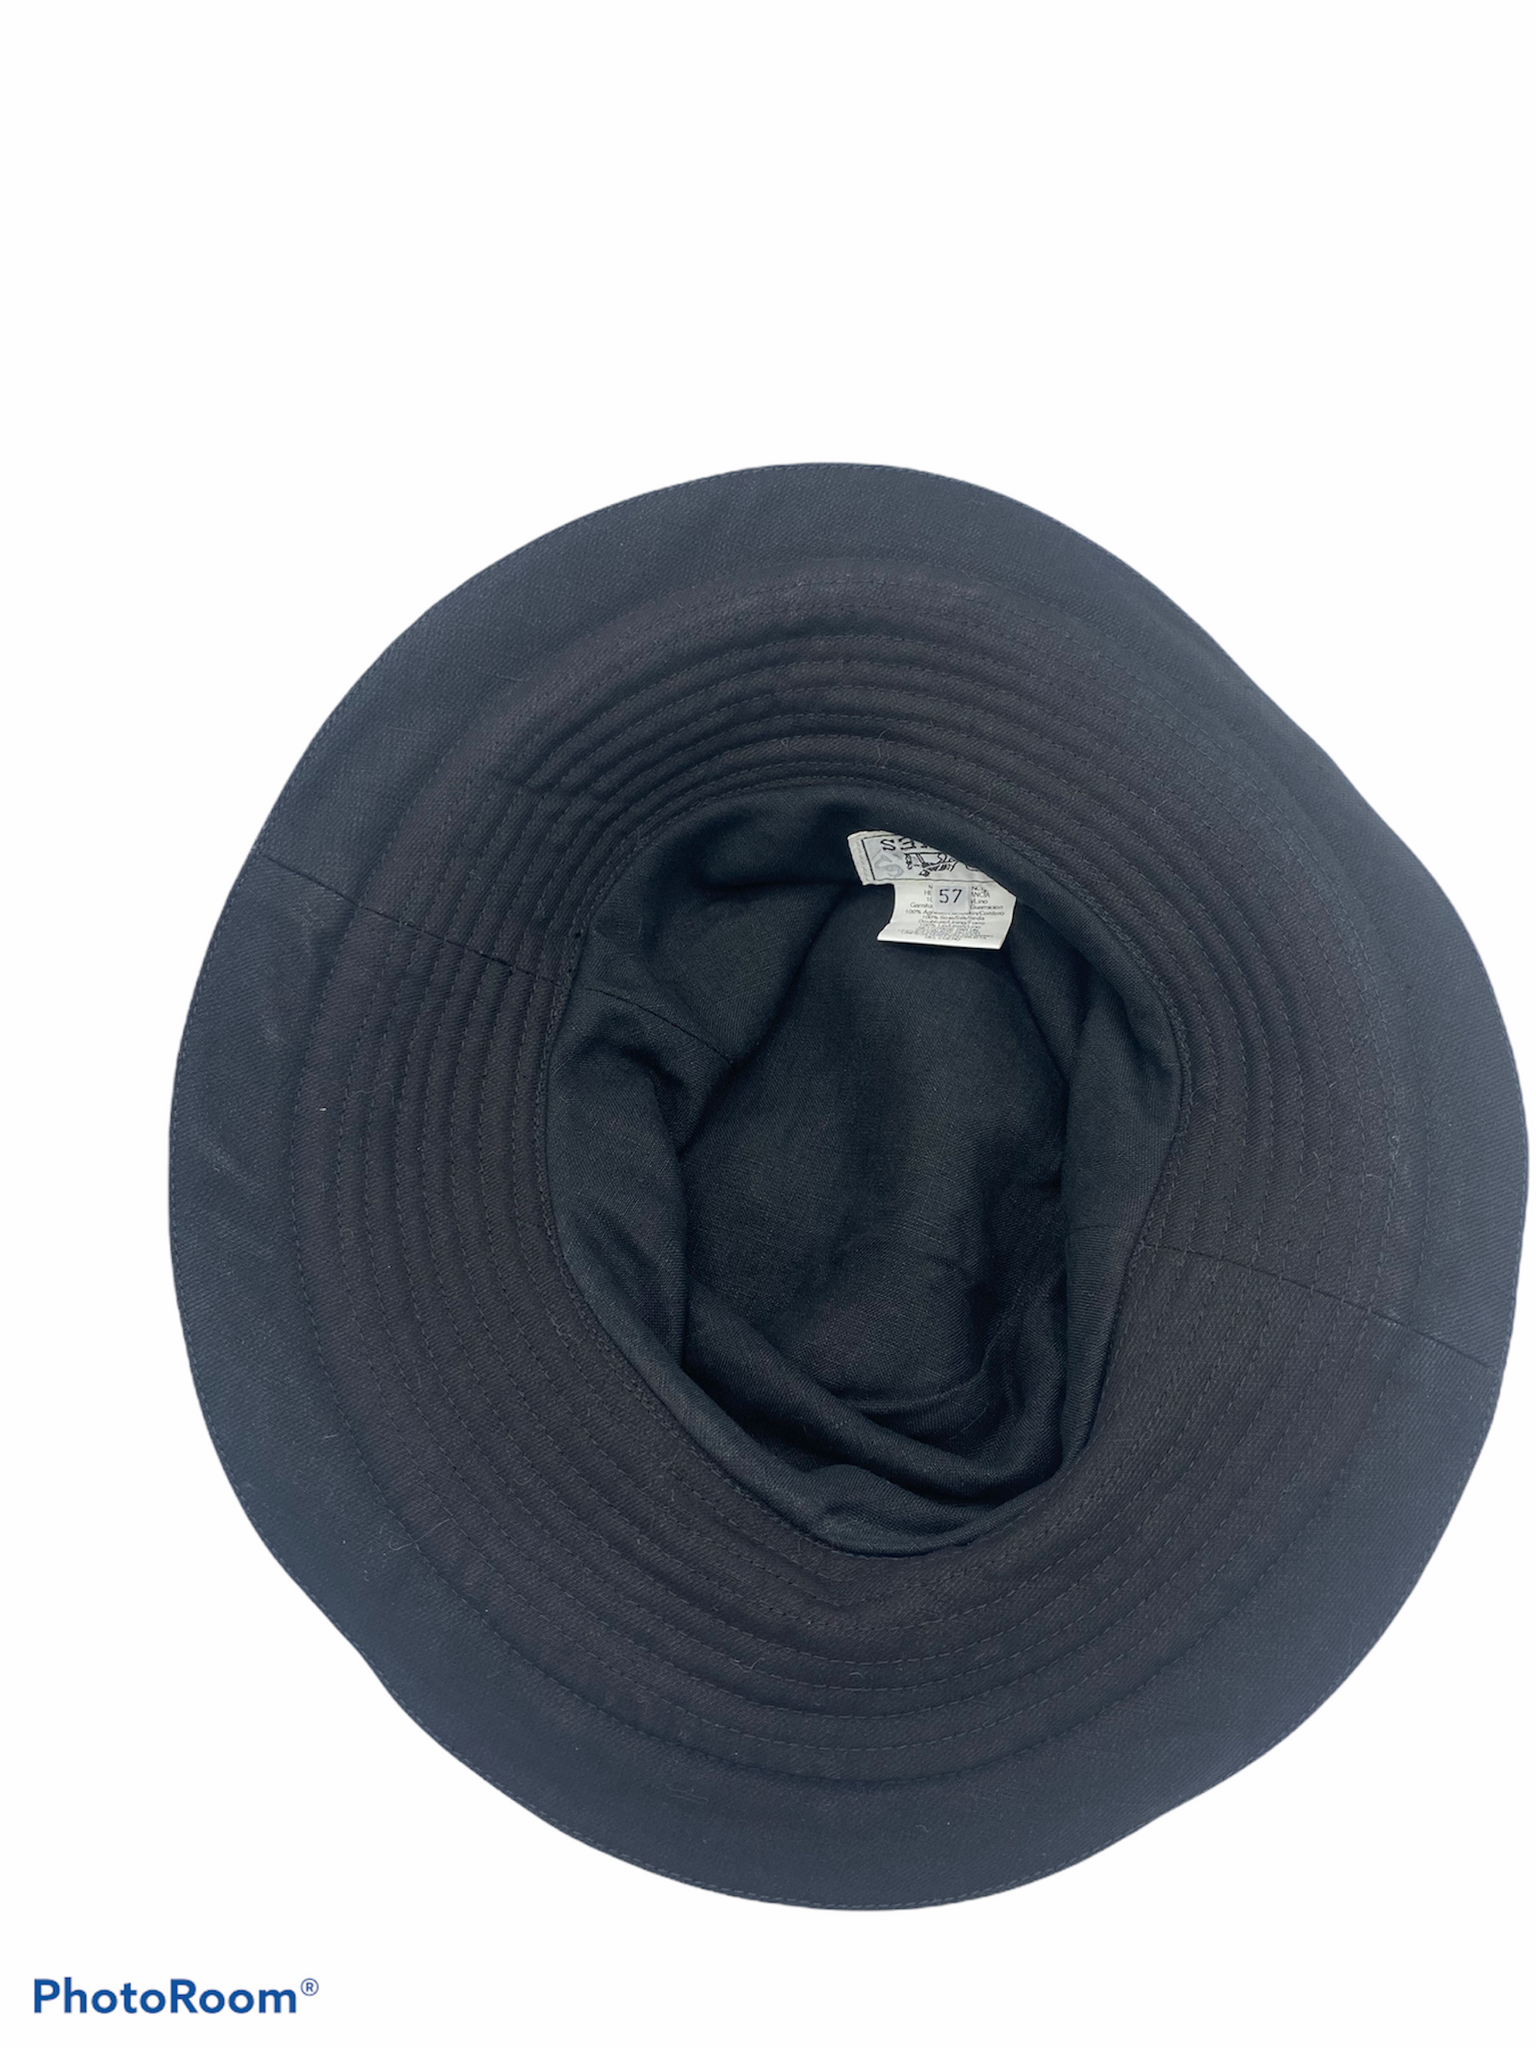  Hermes 2000s Black Linen Bucket Hat with Leather Band INTERIOR 2 of 3